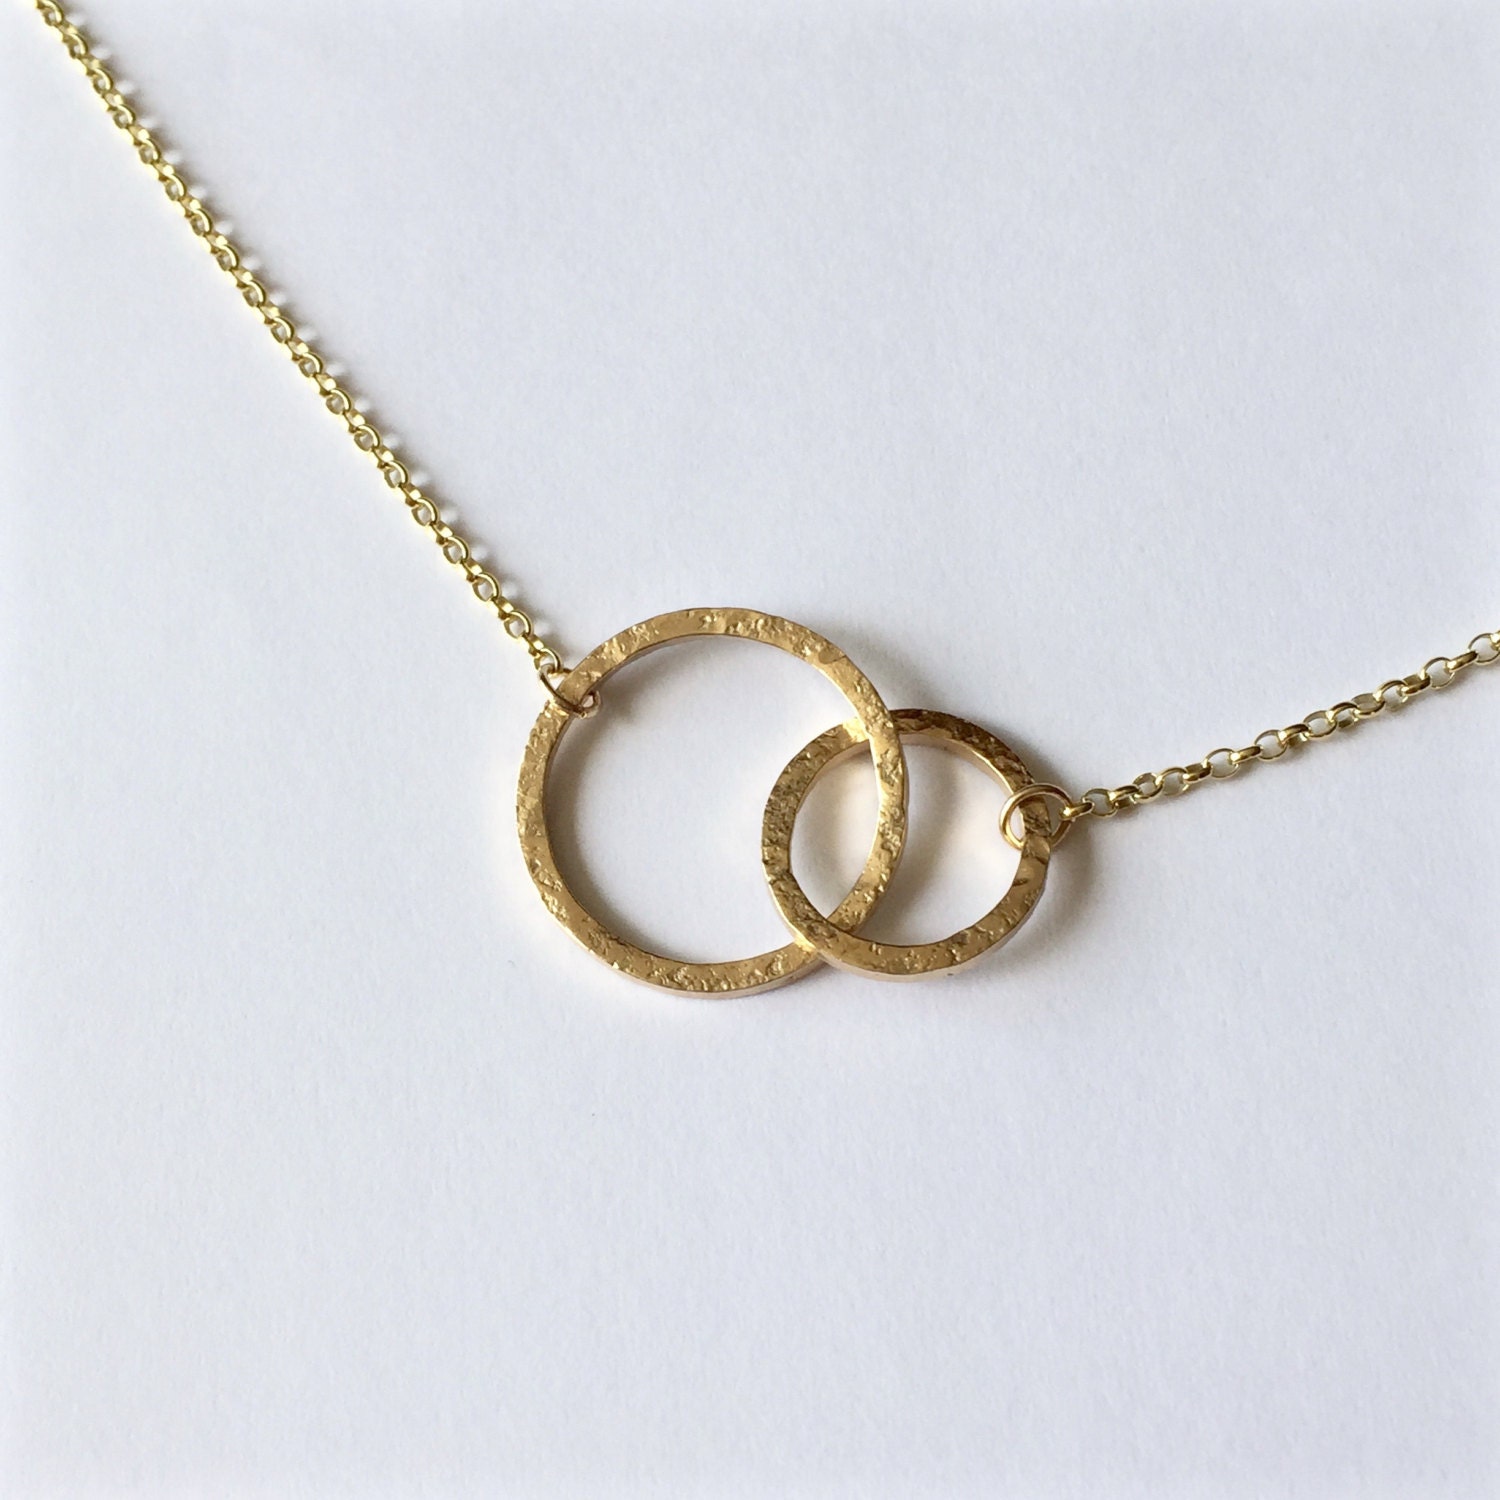 Gold Linked Circles Necklace - Two Joined 9 Carat Yellow Simple